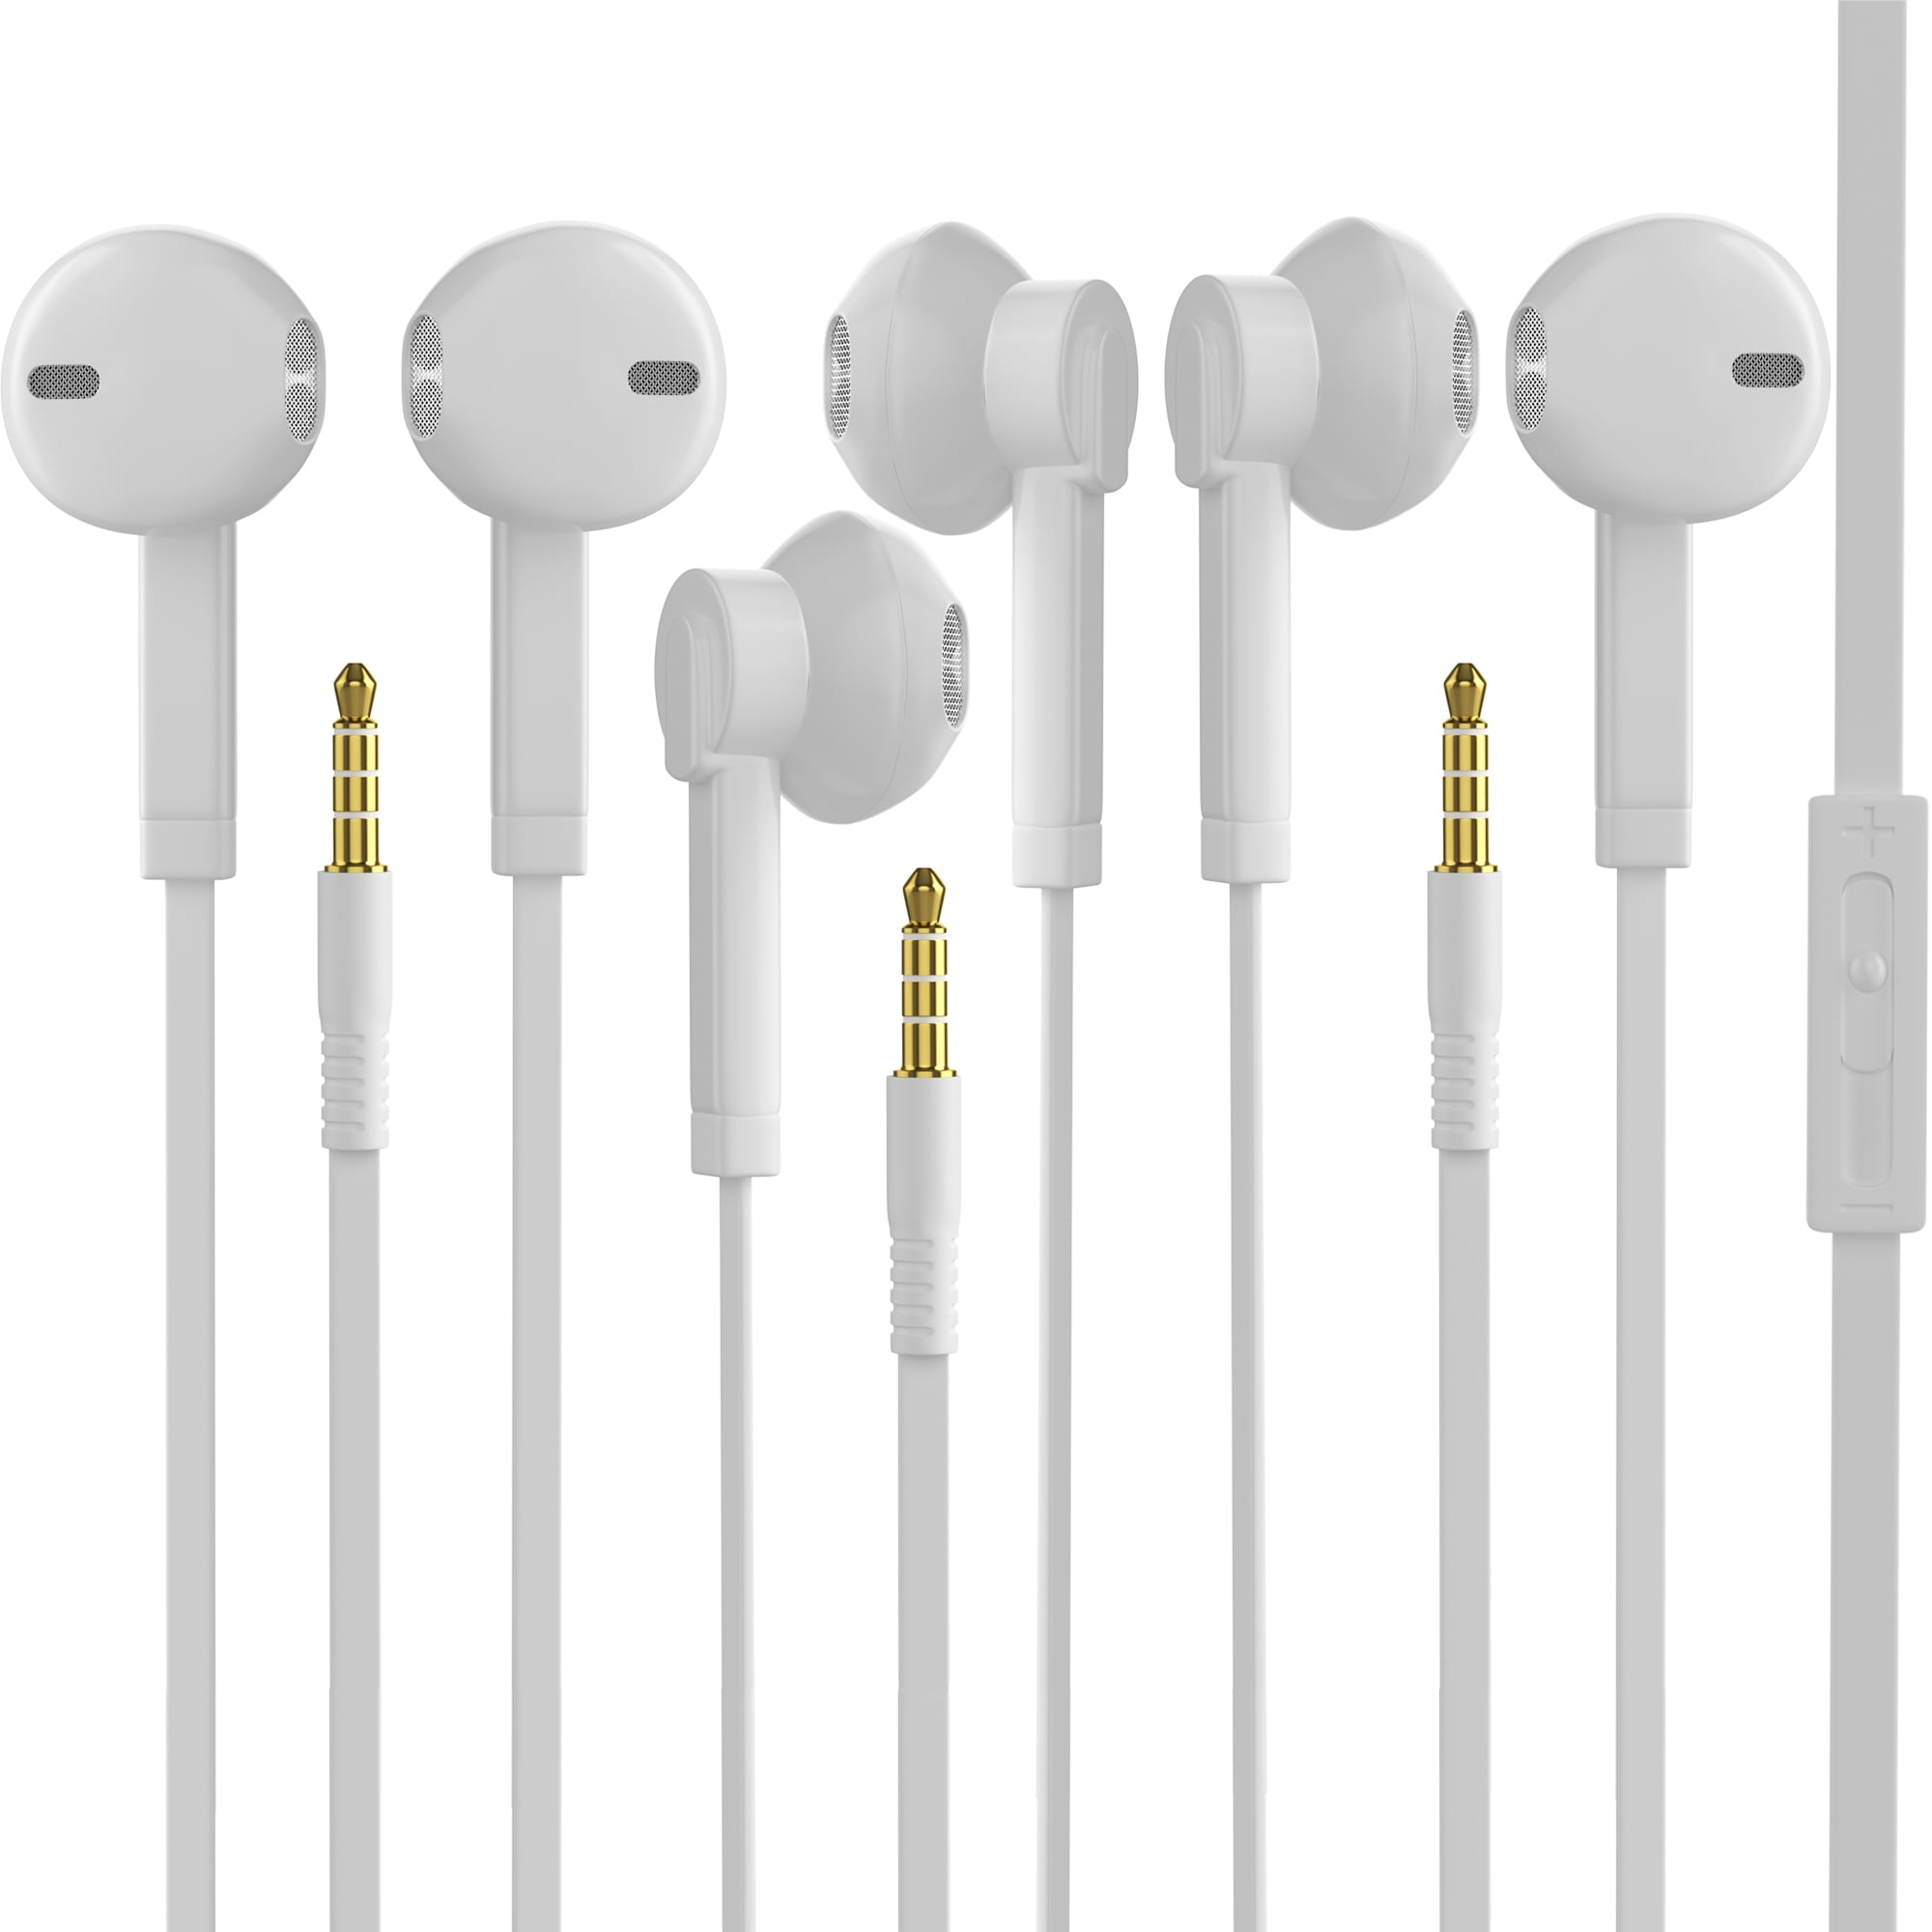 White Volume Control Compatible with iPhone,iPad,Samsung,Compter,MP3/4,Huawei,Android Phone etc Apple MFi Certified 3 Pack-Apple/Samsung Earbuds Wired 3.5mm White Headset with Microphone 